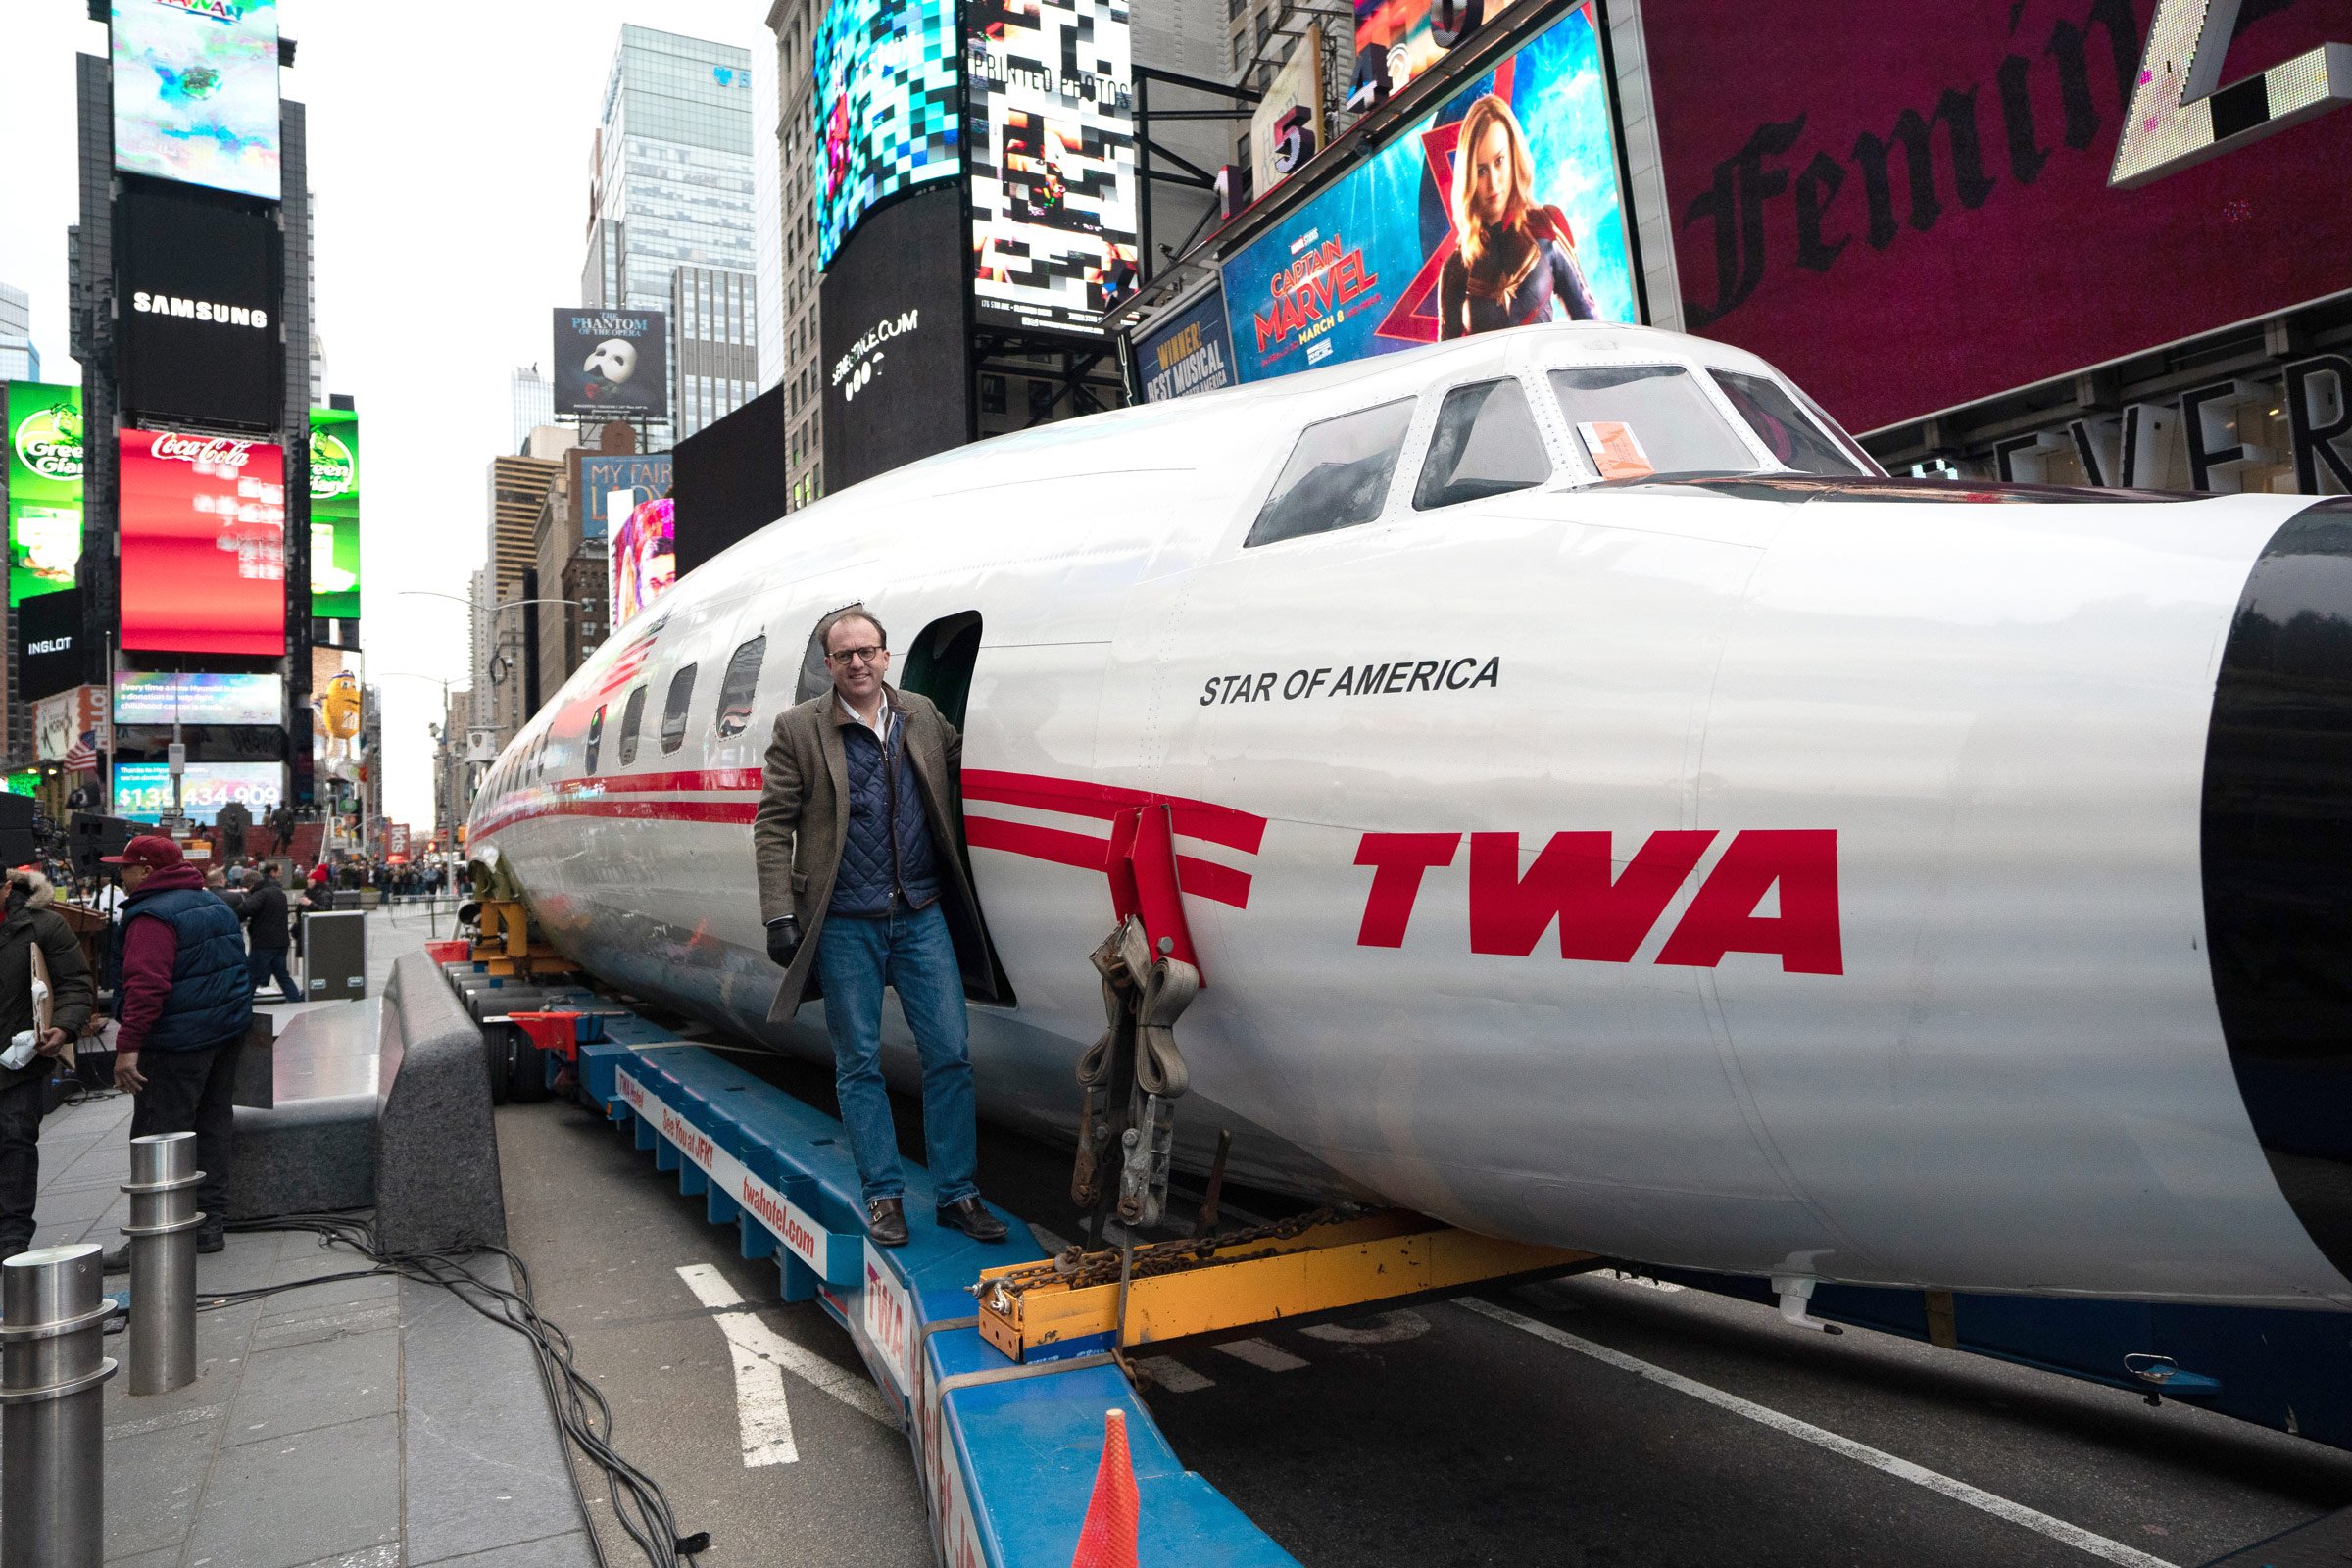 Connie Visits Times Square Twa Hotel At Jfk Airport